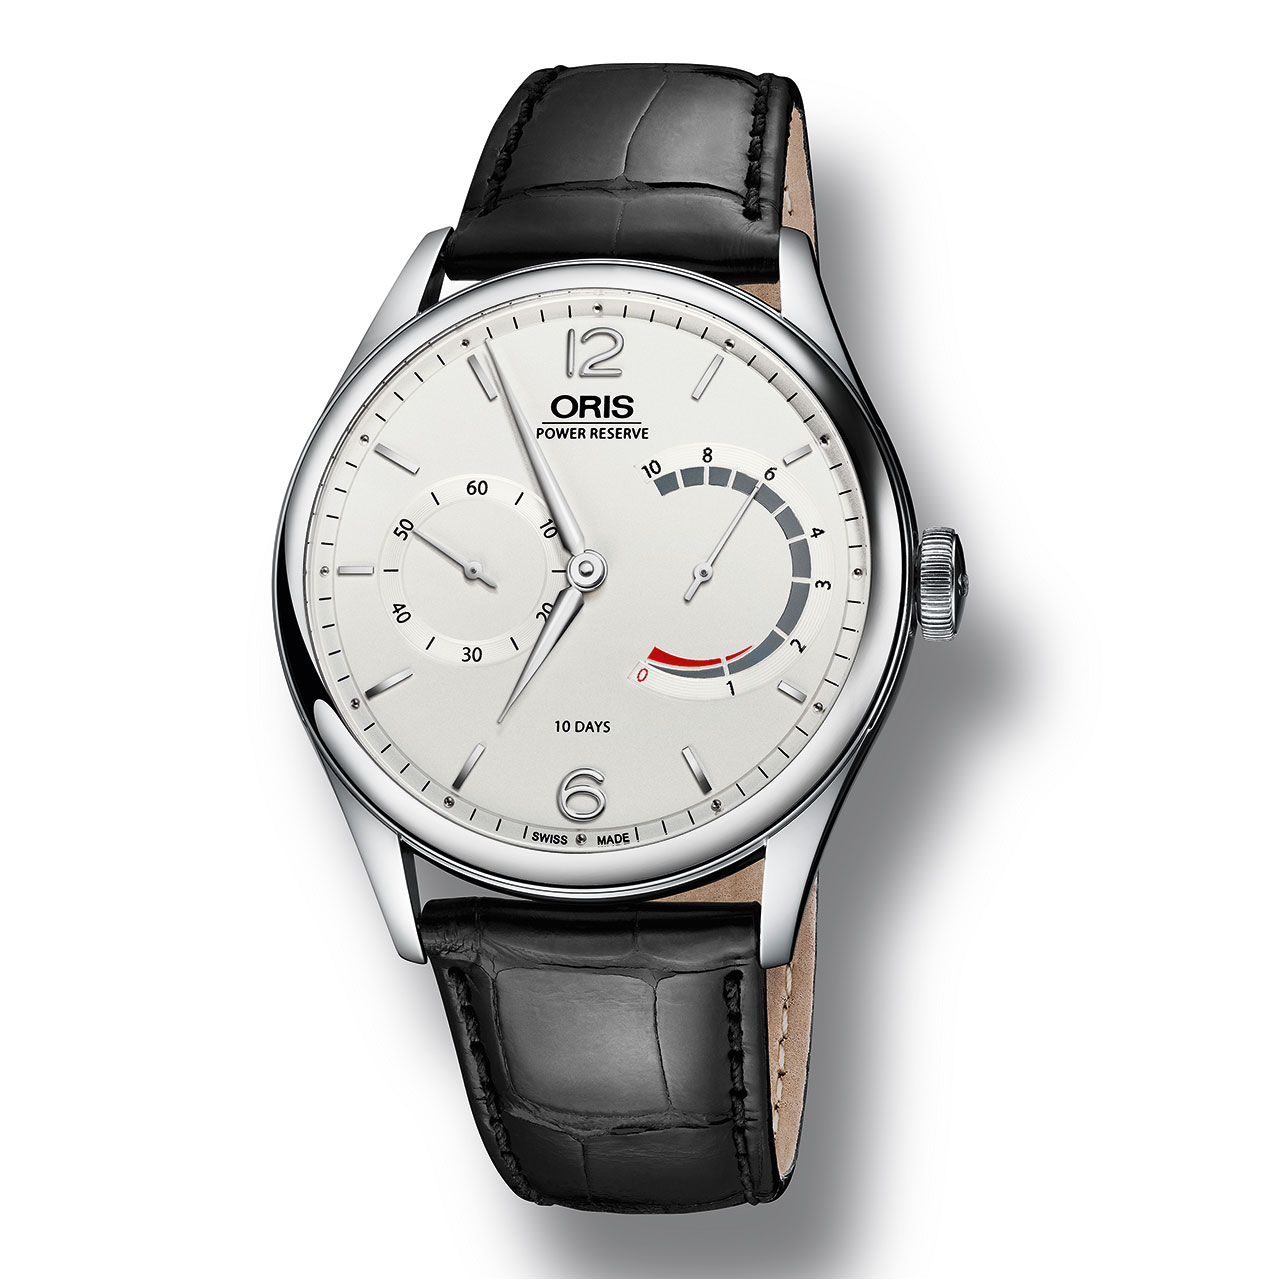 Oris 110 Years Limited Edition Mechanical Watch